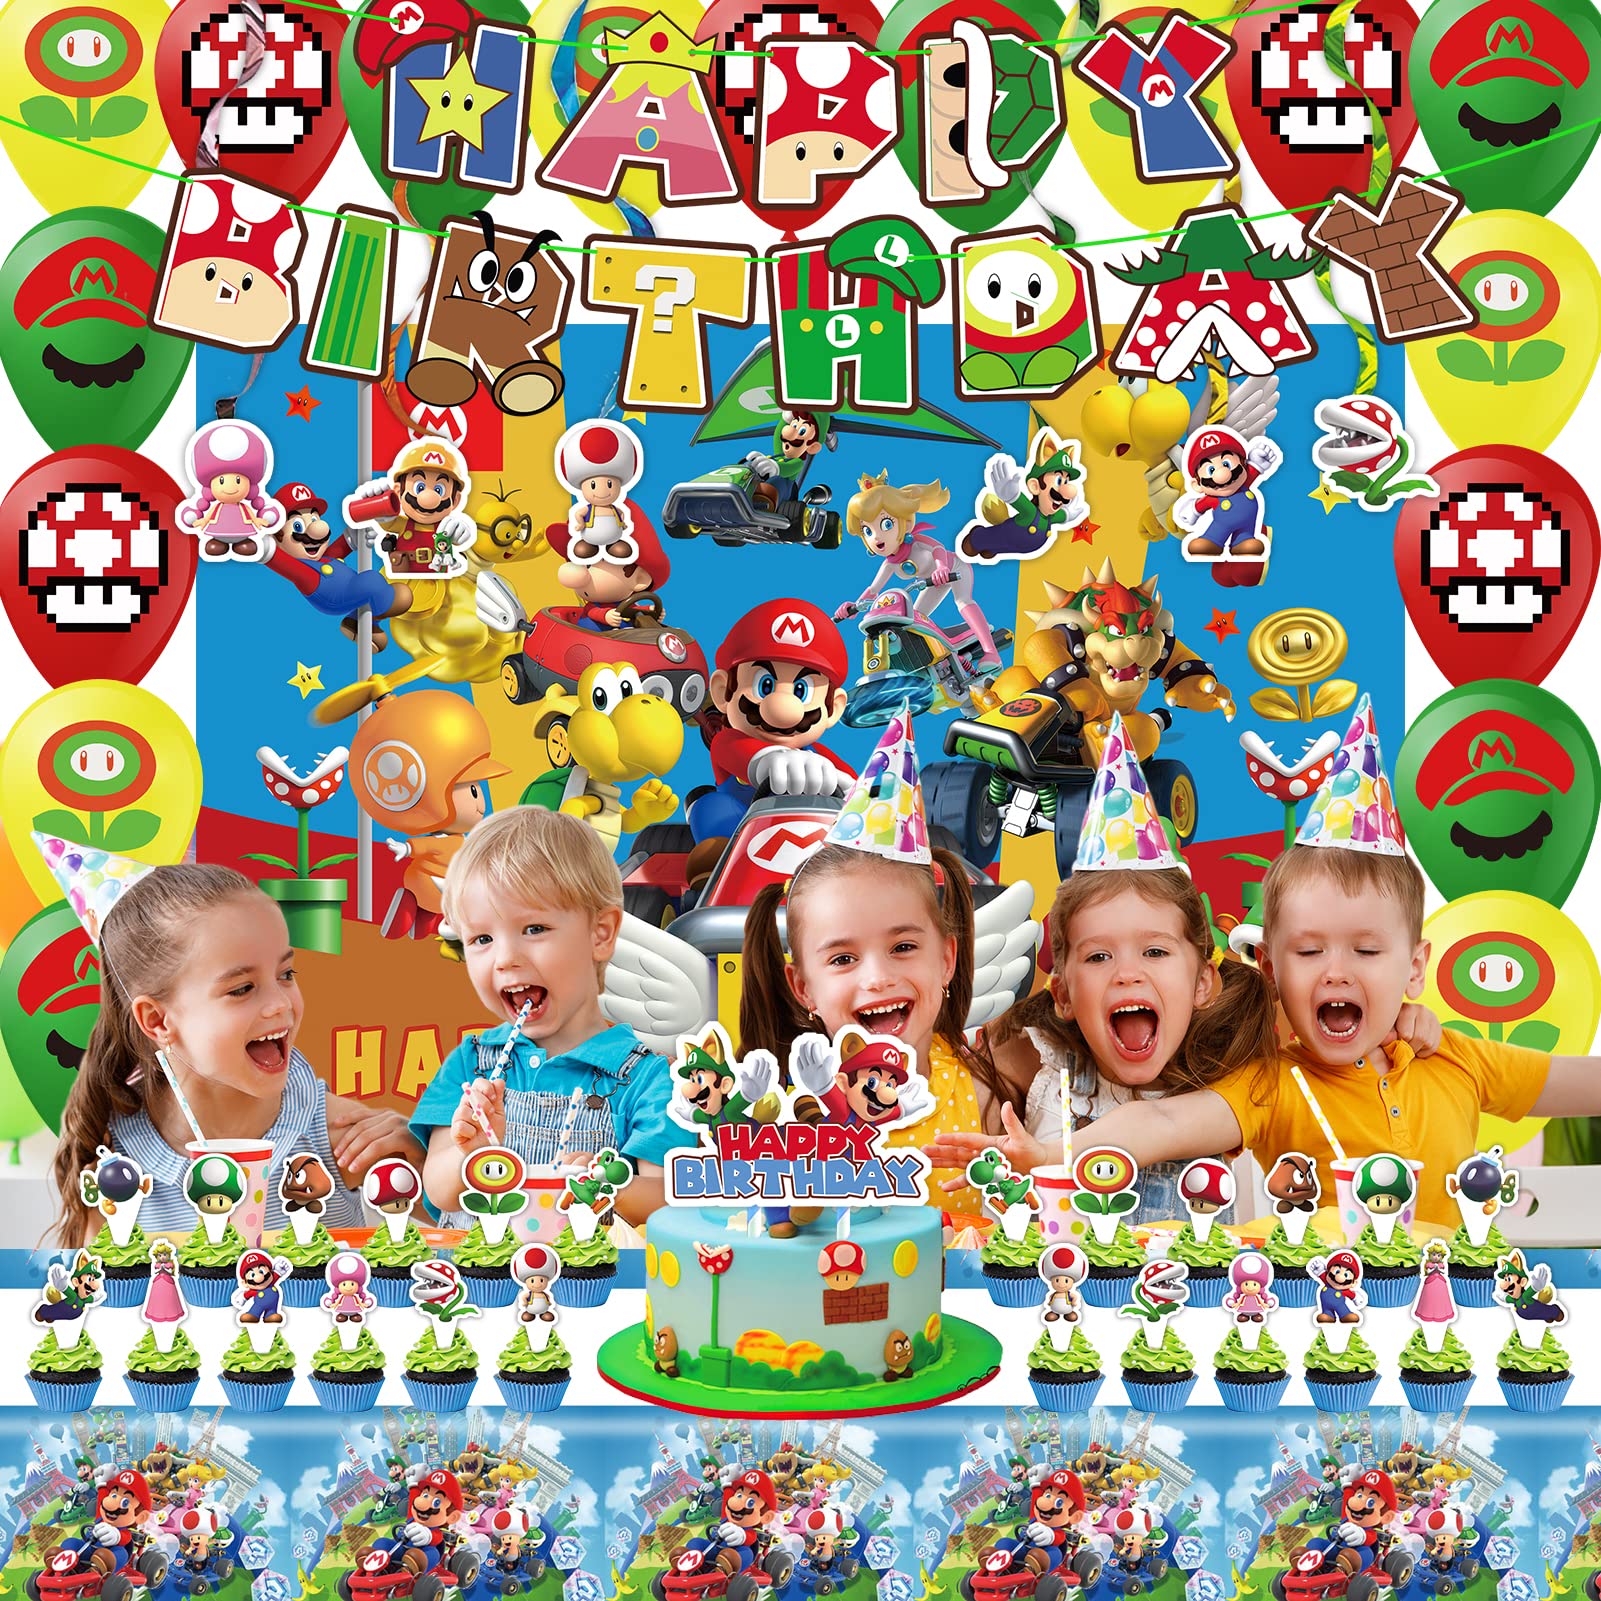 Mario Birthday Party Supplies - Mario Party Supplies Included Mario 18 Balloons, Backdrop, Banner, 6 Hanging Swirls, Tablecloth, 24 Cupcake Cake Toppers